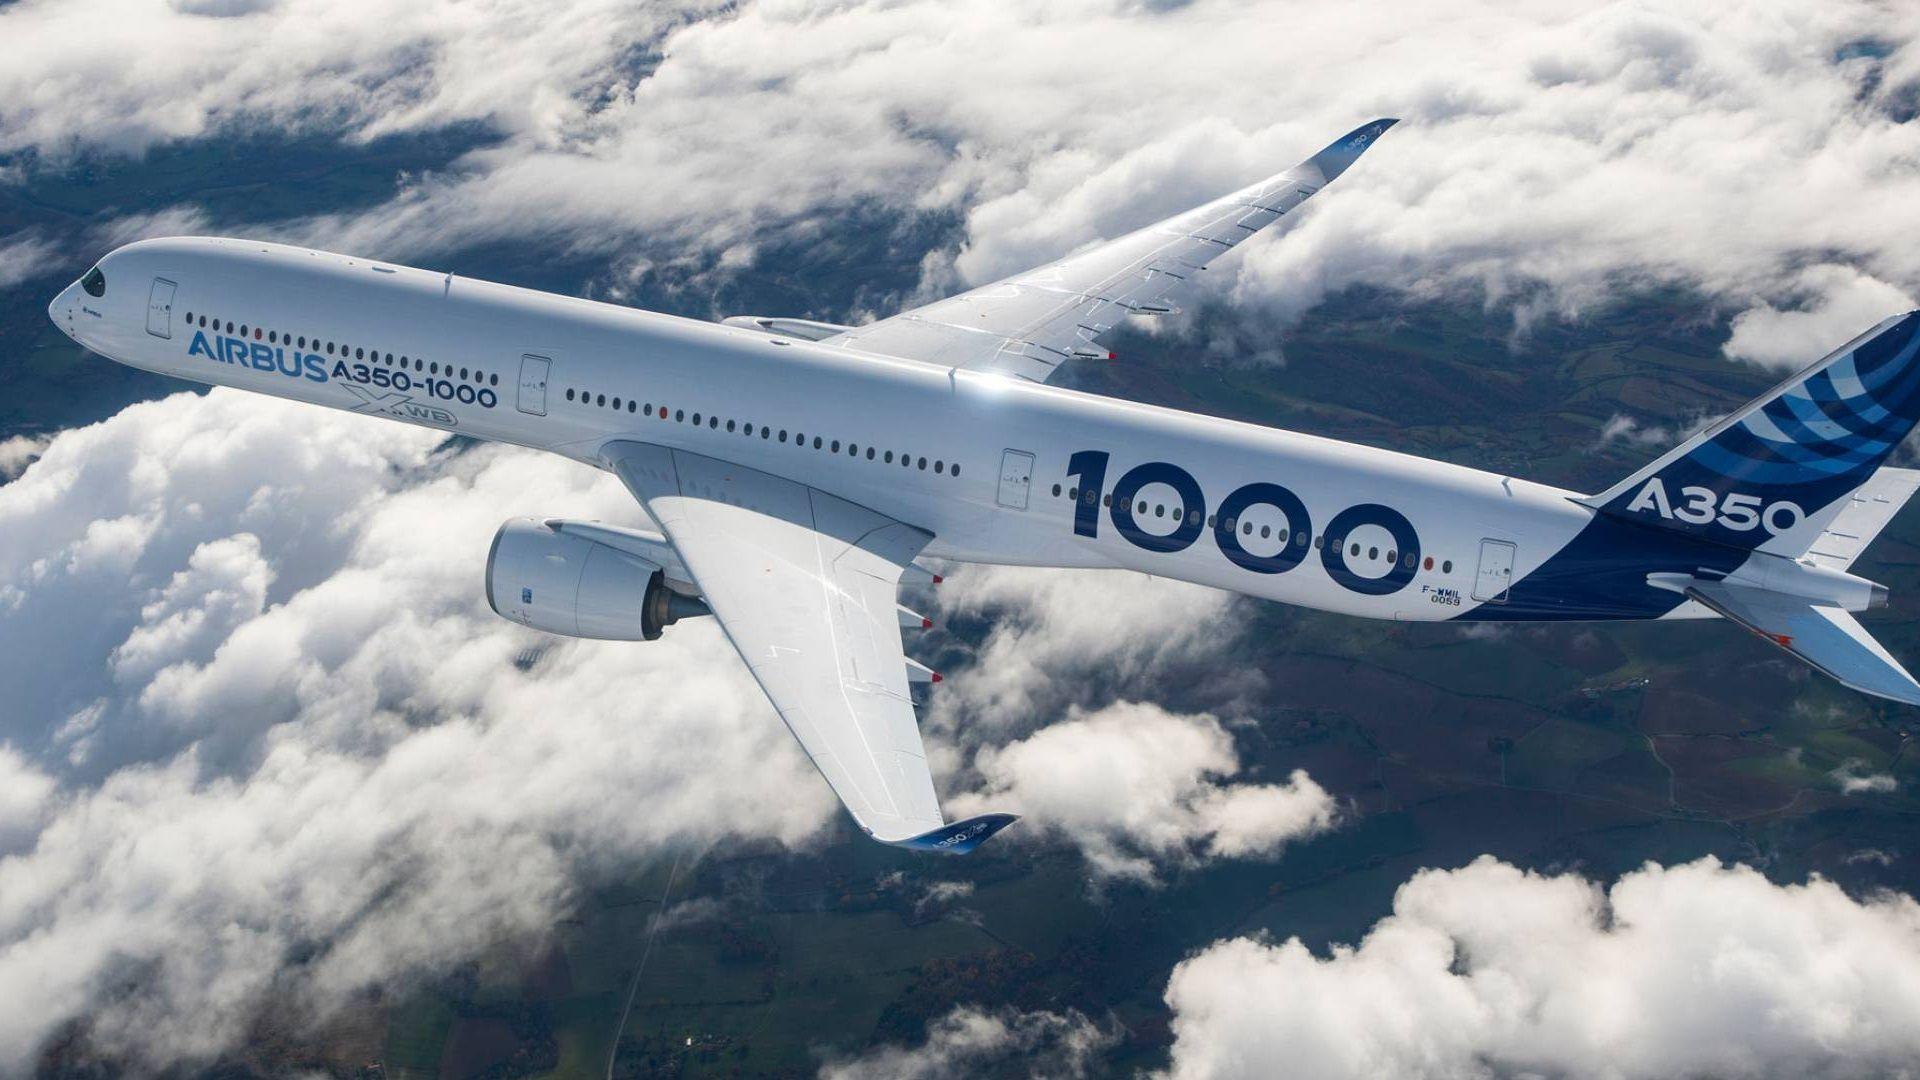 Wallpaper Airbus A350 aircraft 1920x1080 Full HD 2K Picture, Image